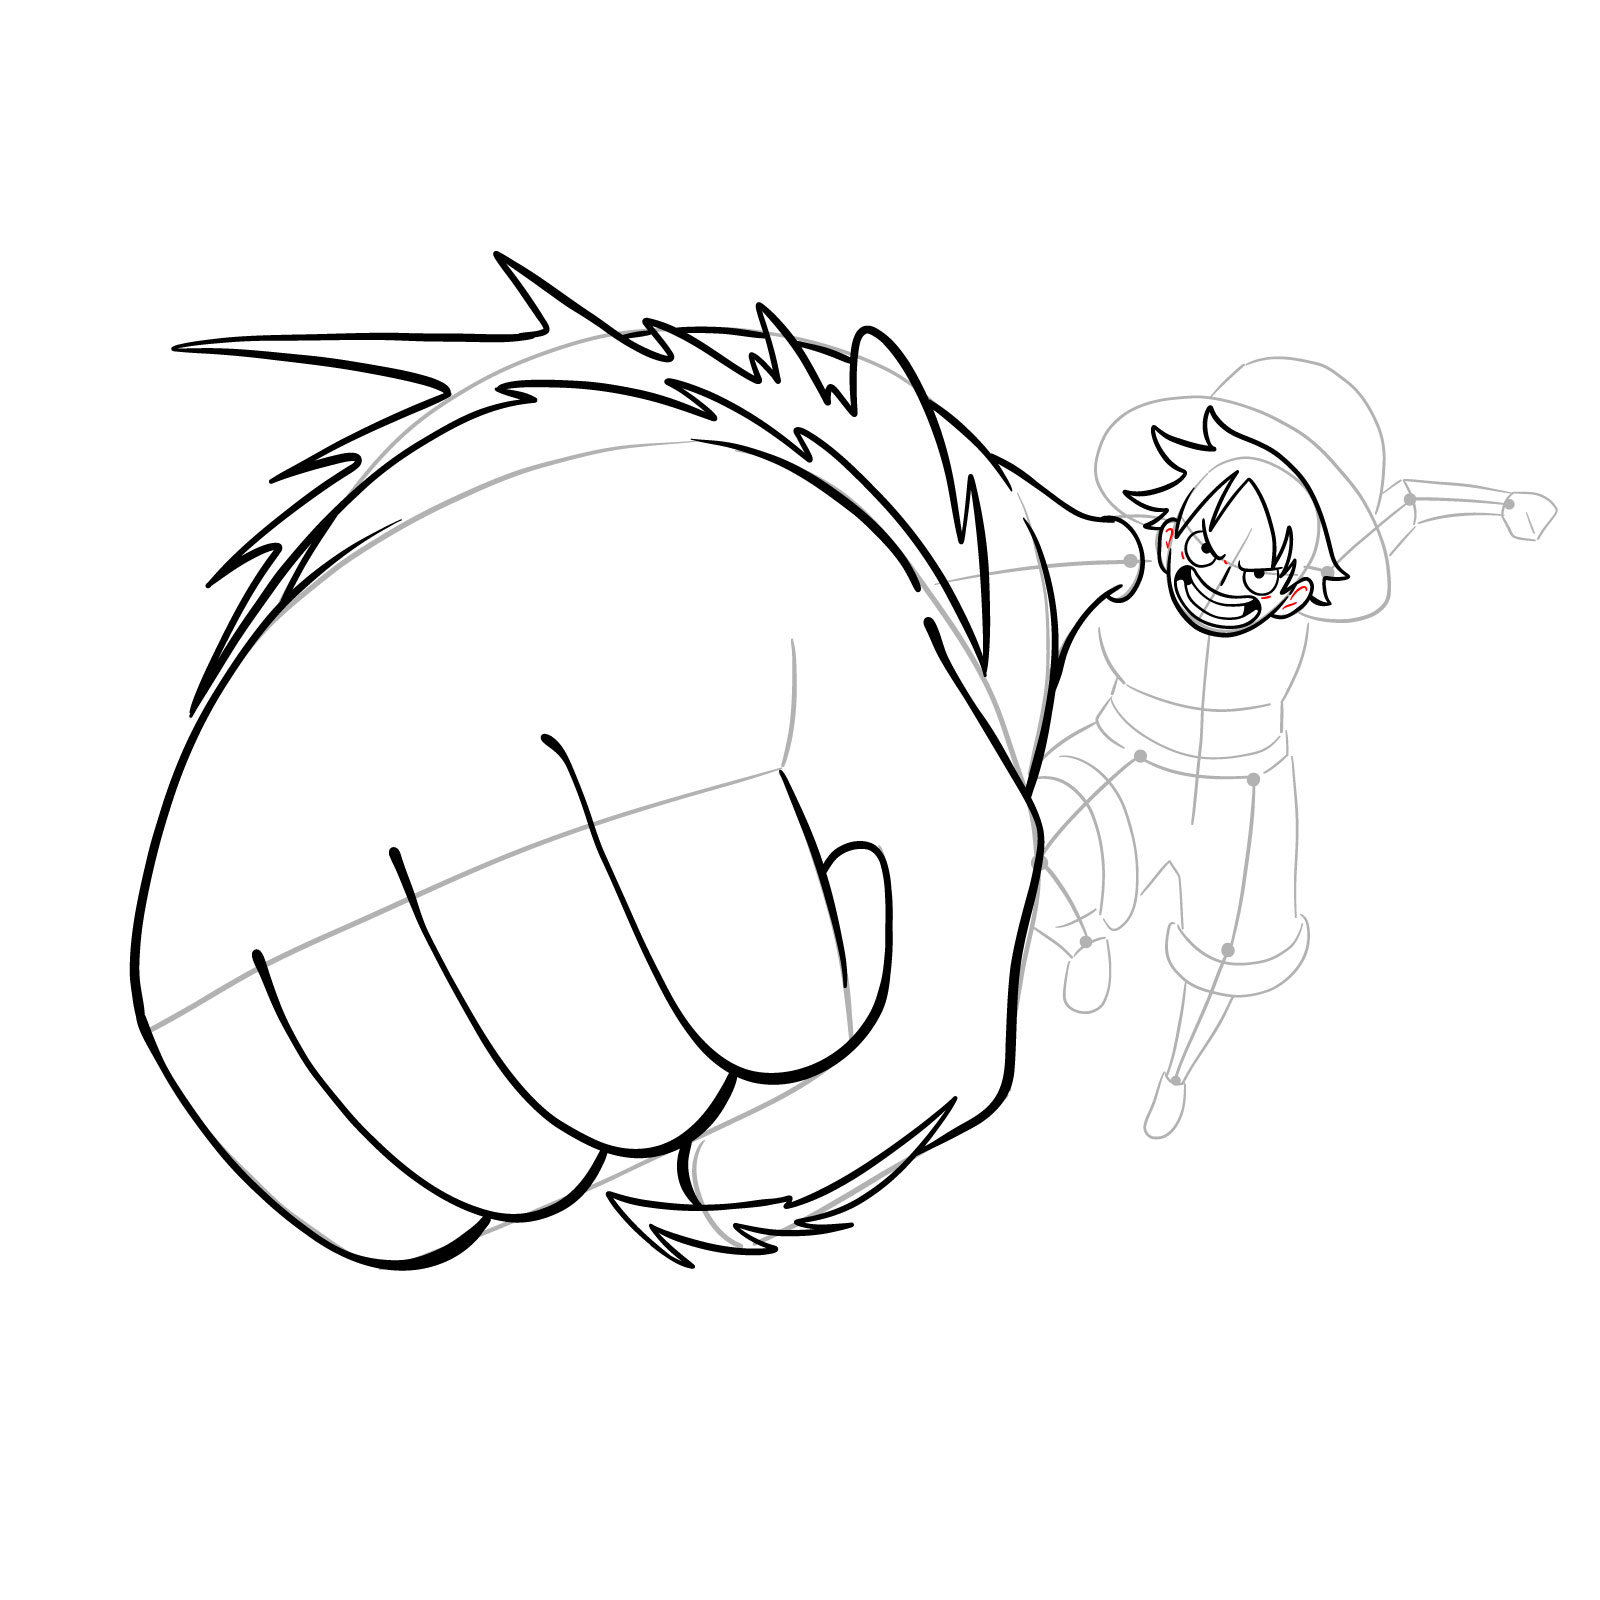 How to draw Luffy's Gear 3 without haki - step 21